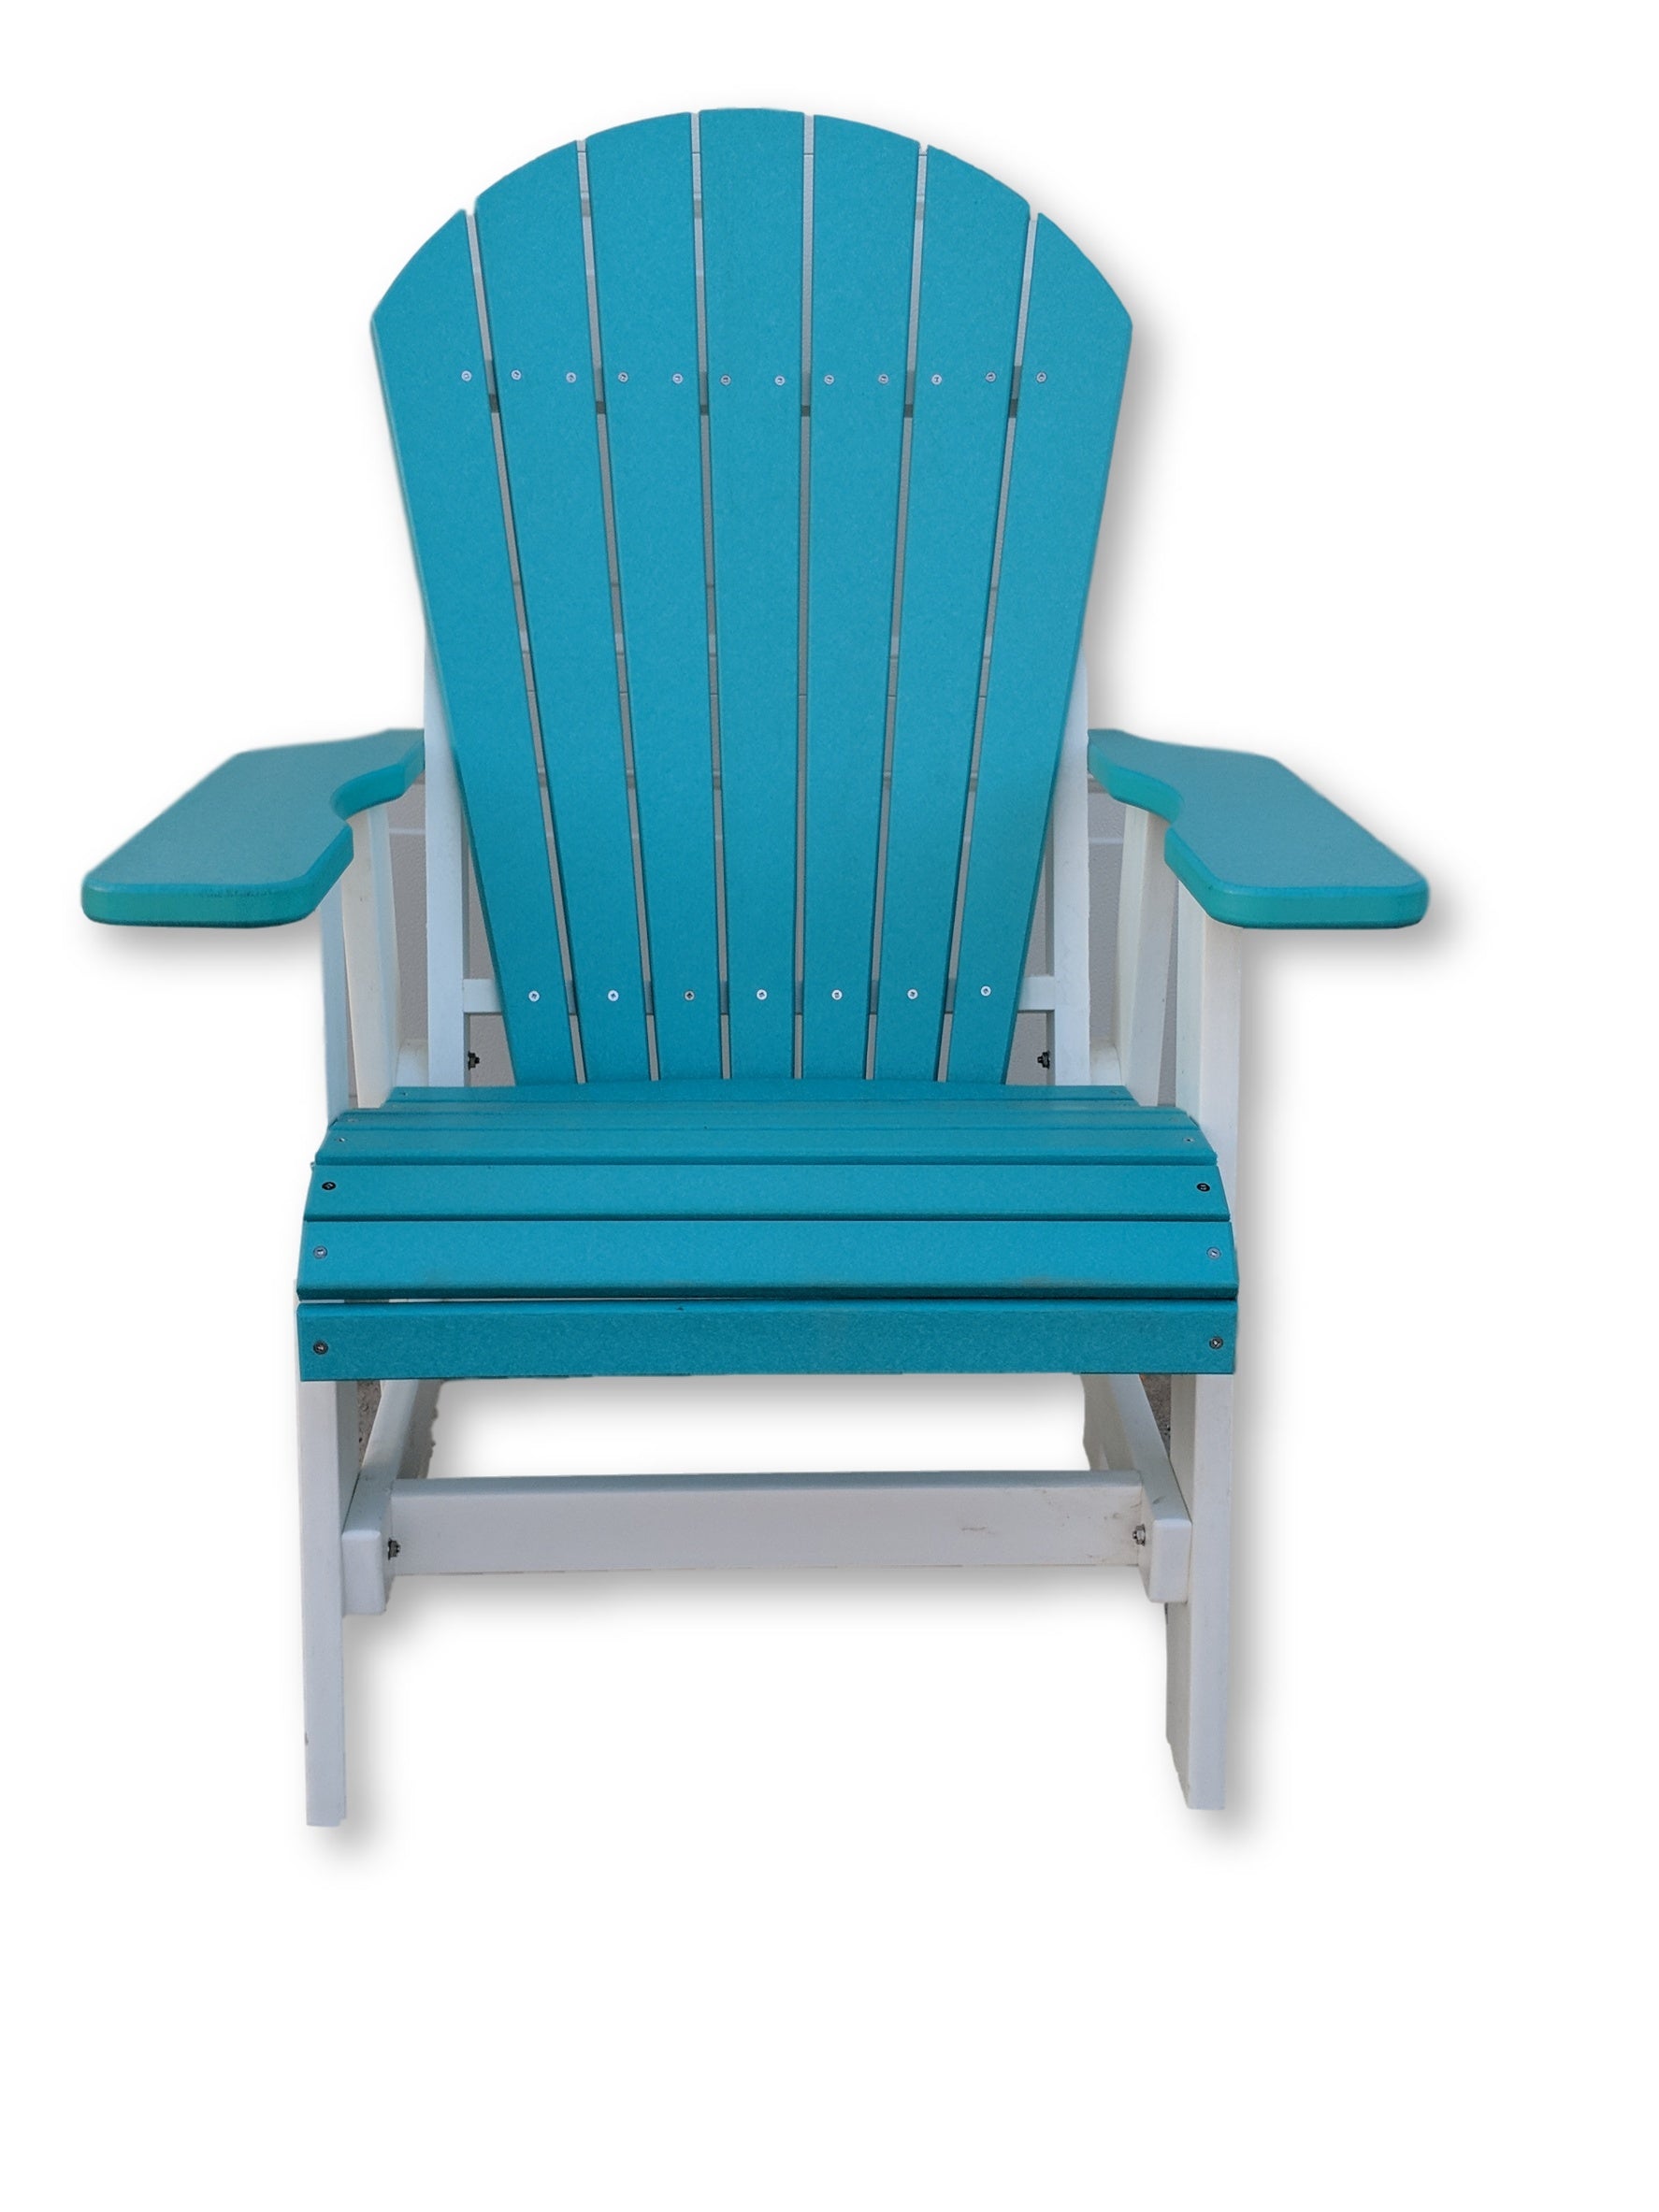 Aruba Blue and White Folding Adirondack Chair(No Cup Holders)